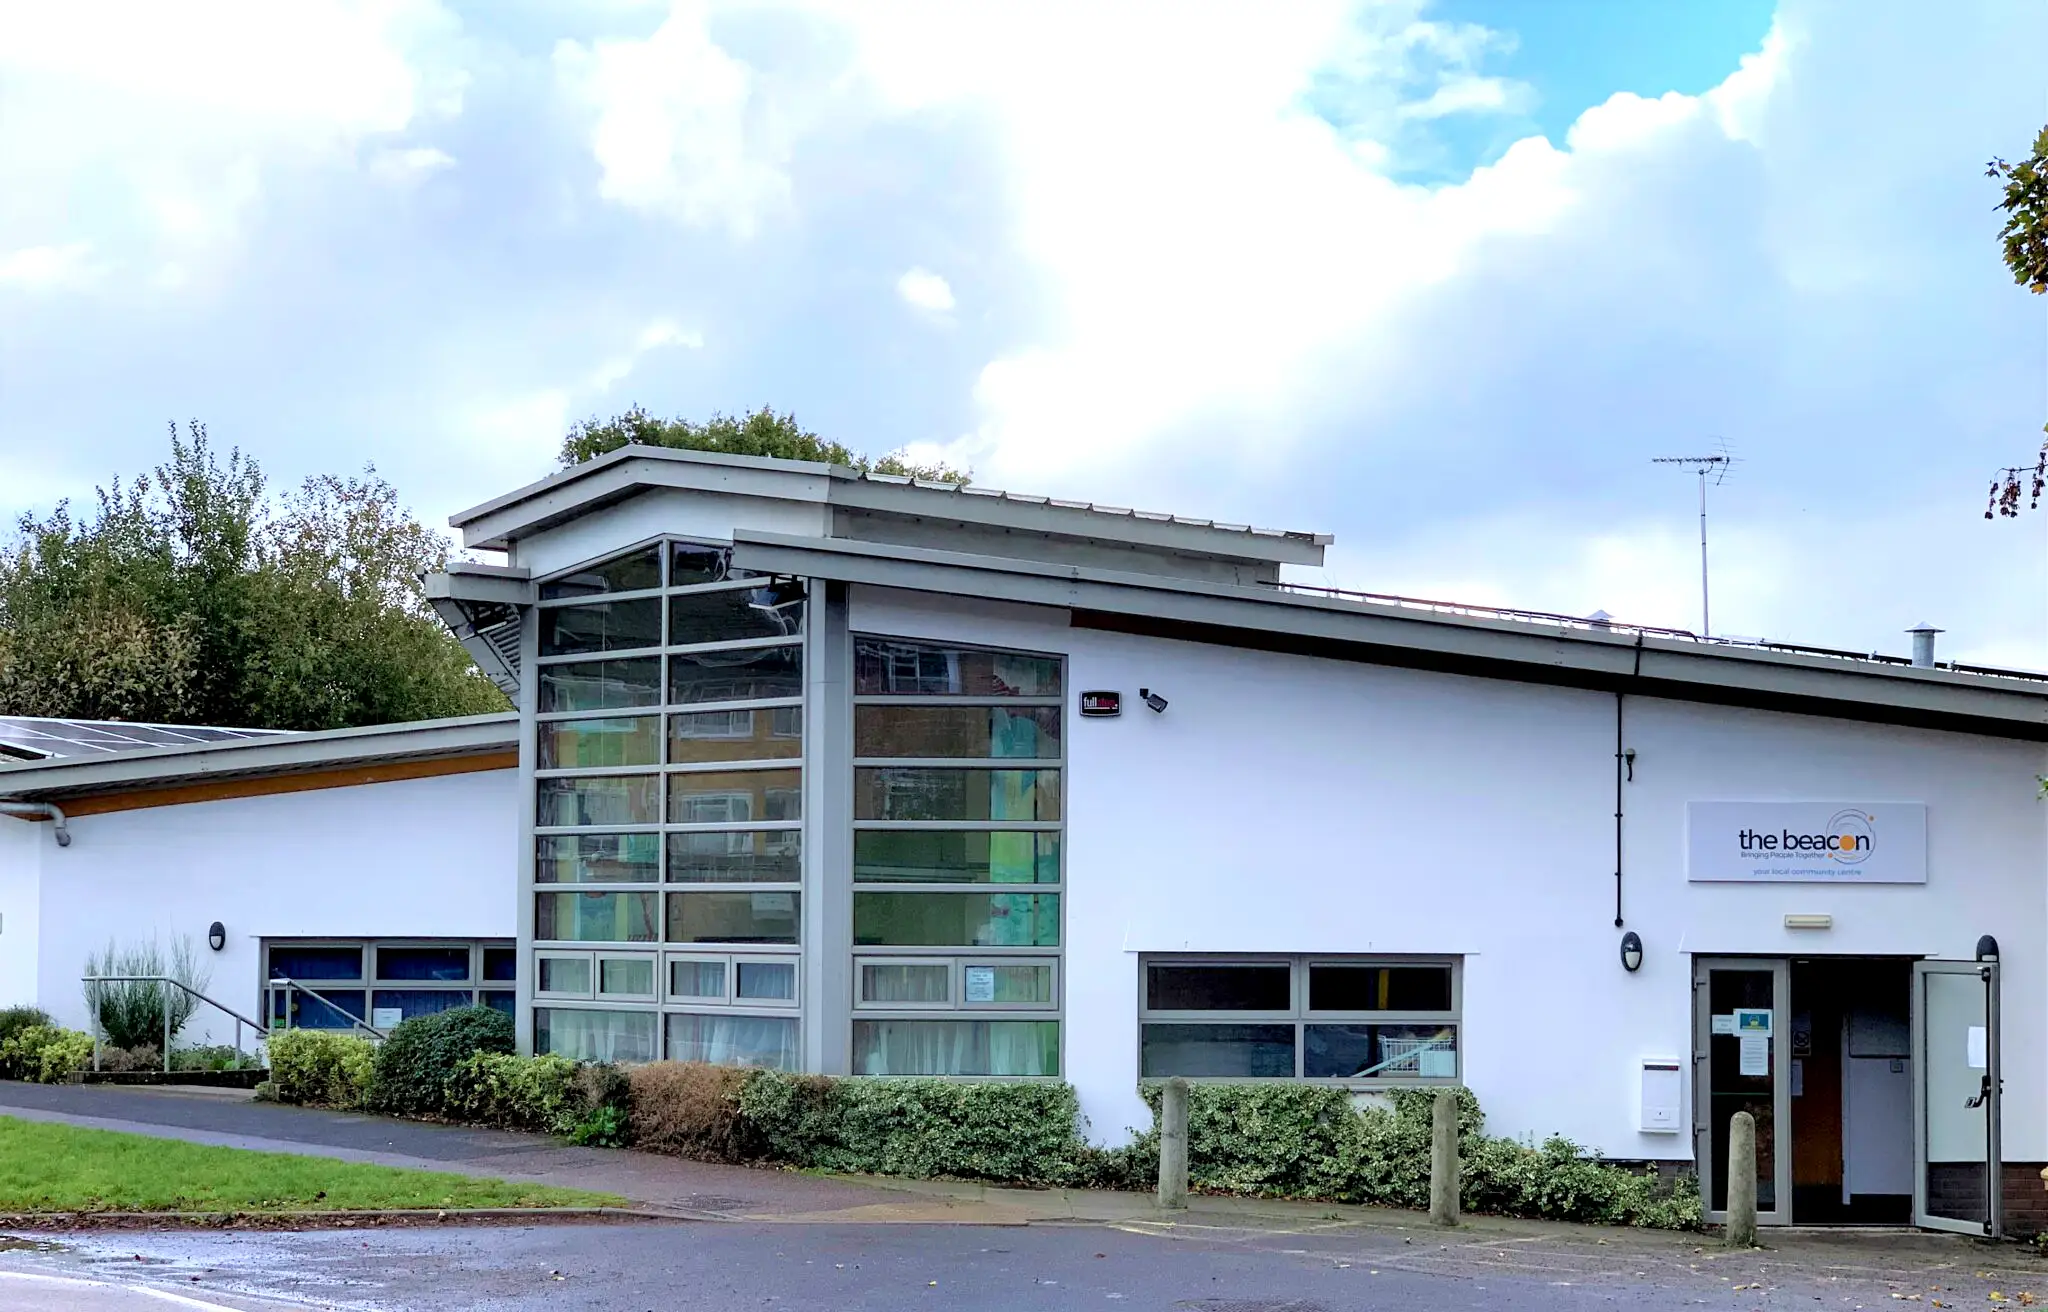 The Beacon Community Centre, Exeter